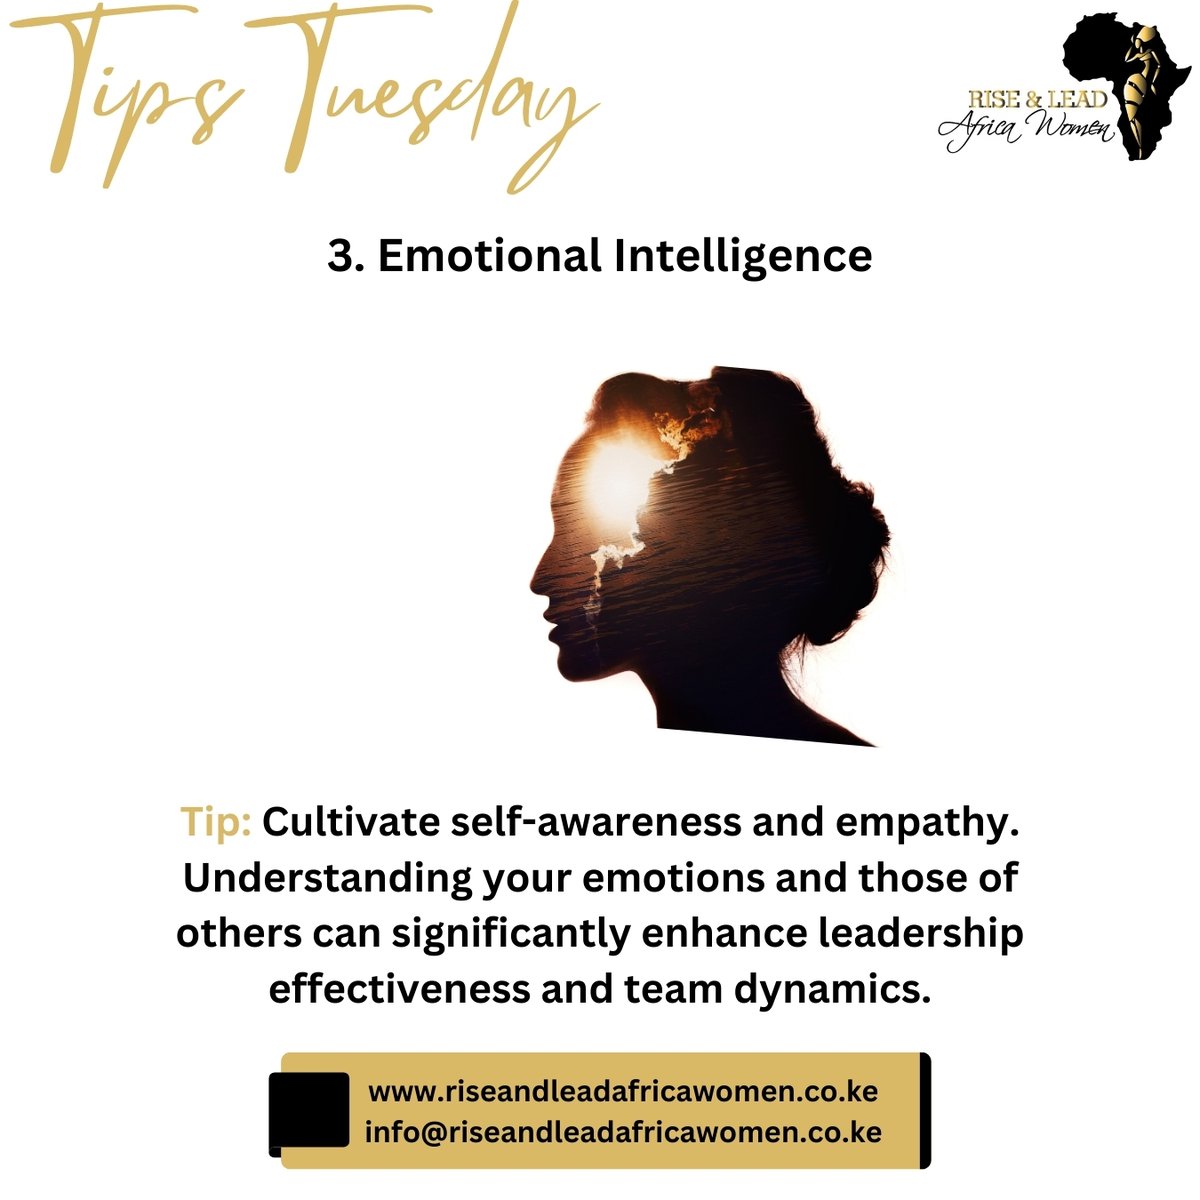 It’s #TipsTuesday! 5 Leadership Skills every woman should master:
Effective Communication
Strategic Thinking
Emotional Intelligence
Confidence
Adaptability Which skill are you focusing on this week?  #RiseAndLeadAfricaWomen 
Brian Chira| Rest in Peace| Nasra|Kerch Bridge